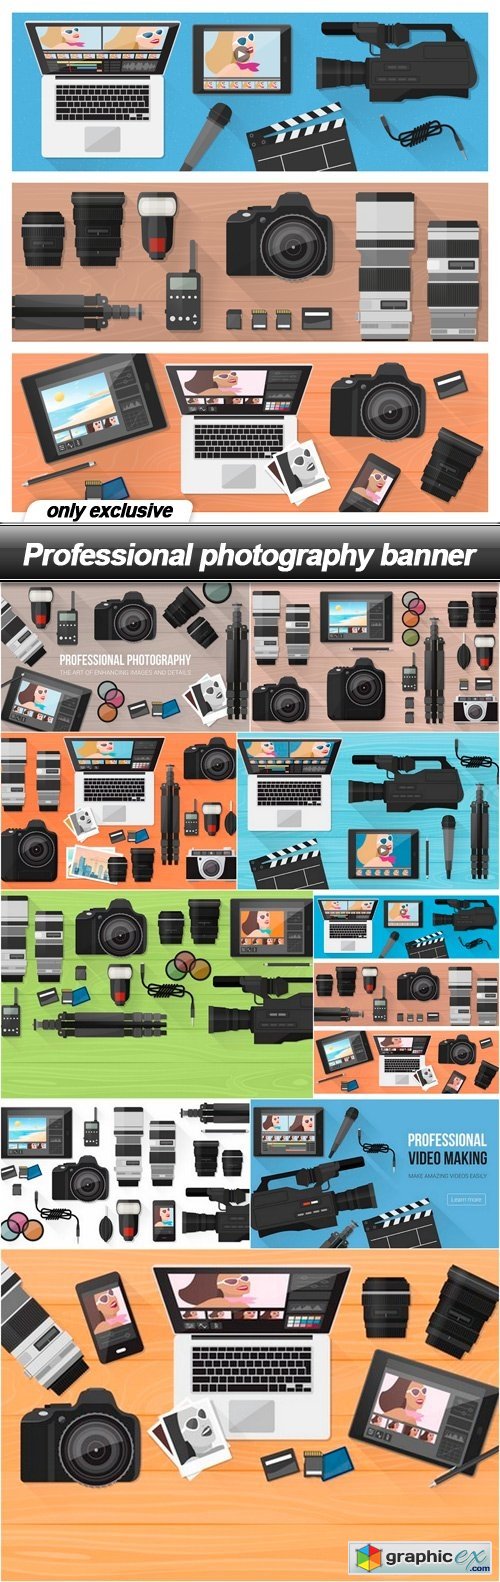 Professional photography banner - 9 EPS